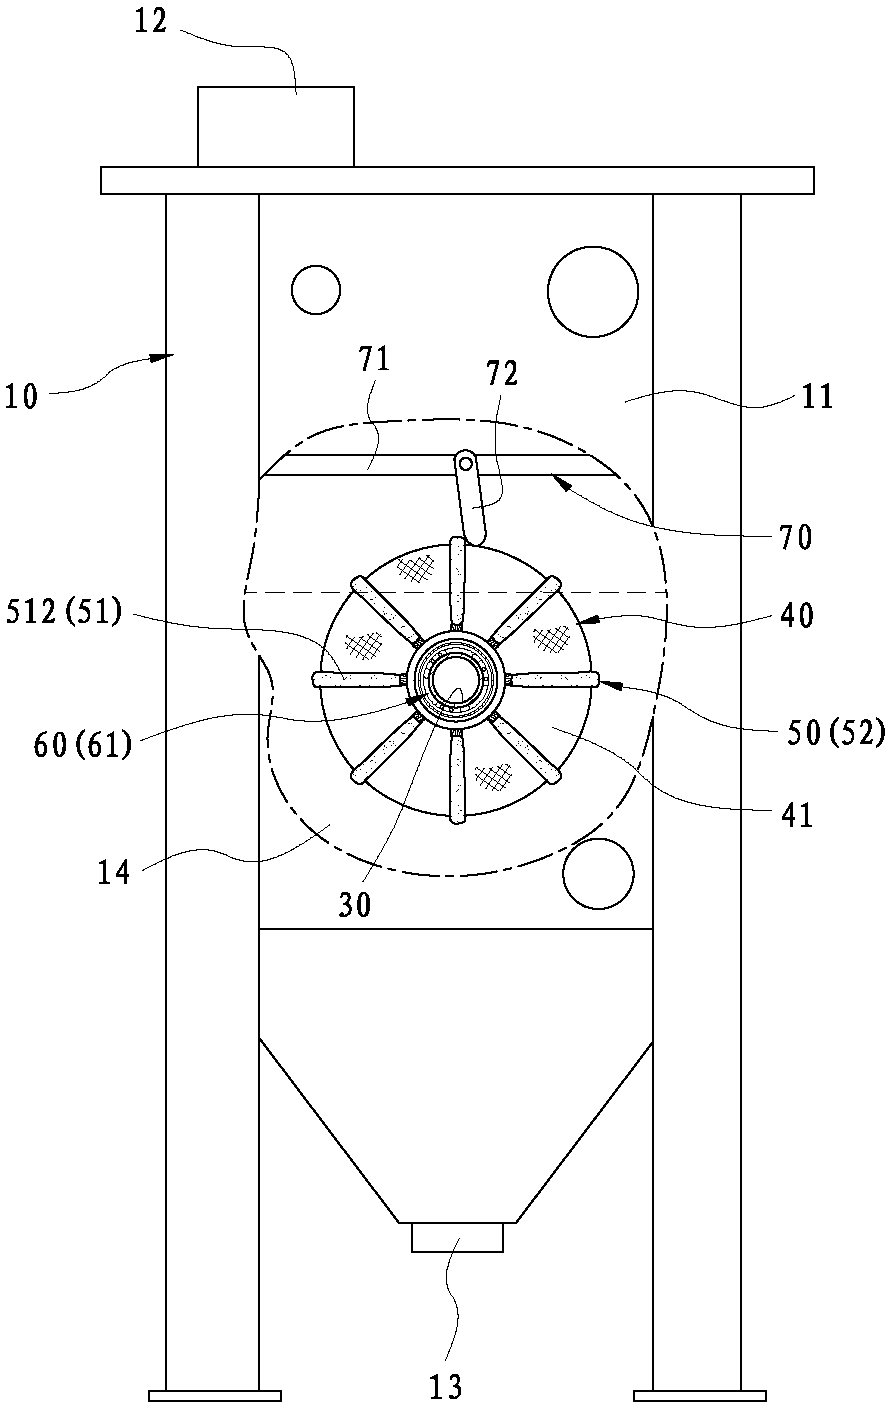 Water treatment device capable of scraping membrane surface sludge